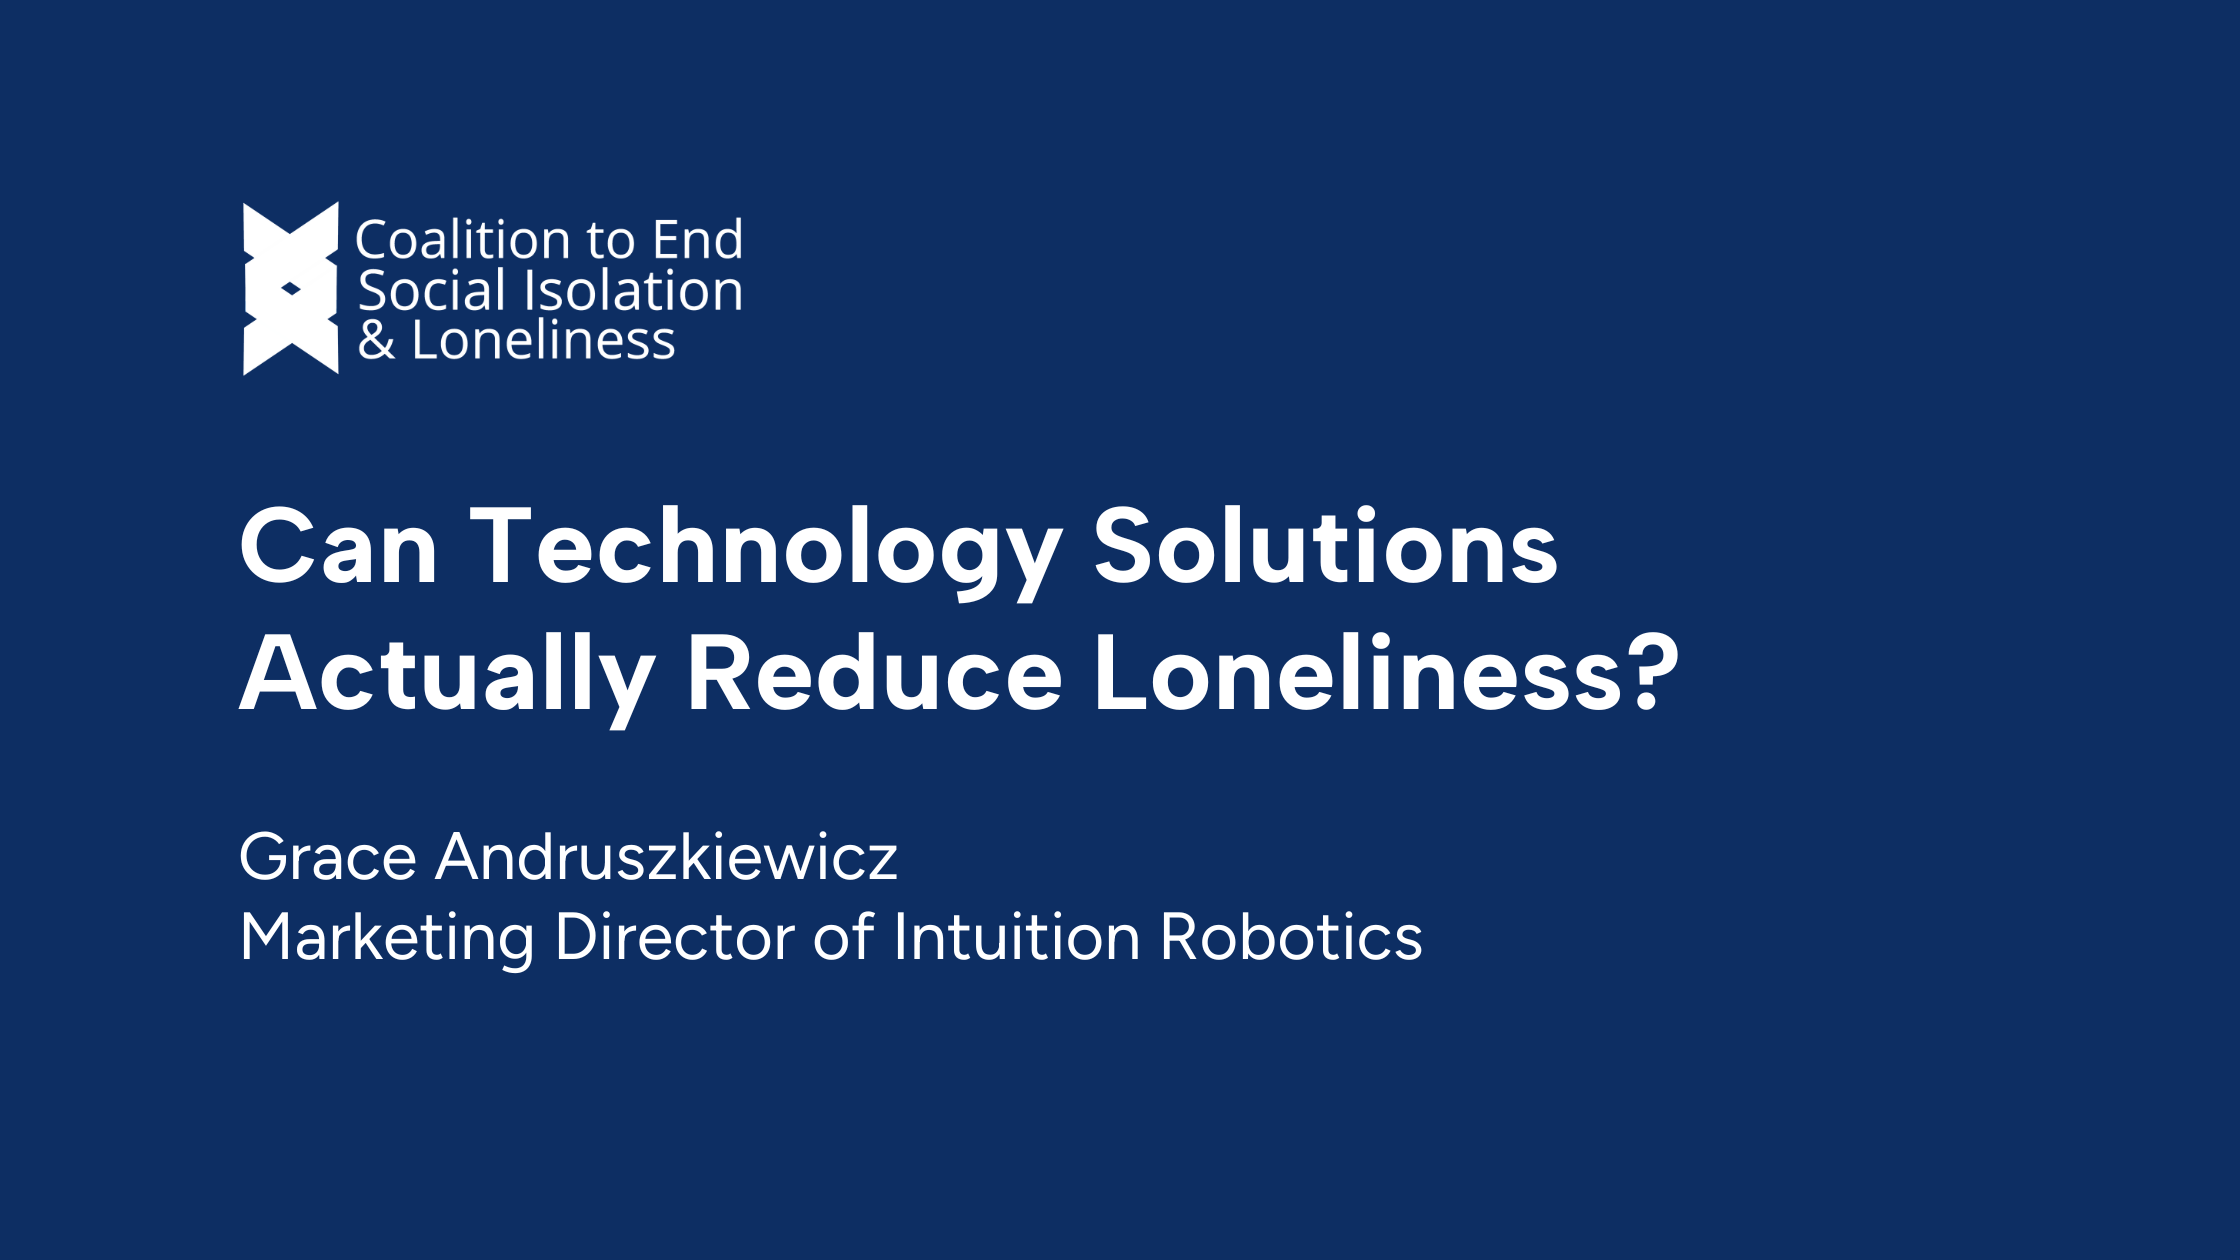 Can Technology Solutions Actually Reduce Loneliness?